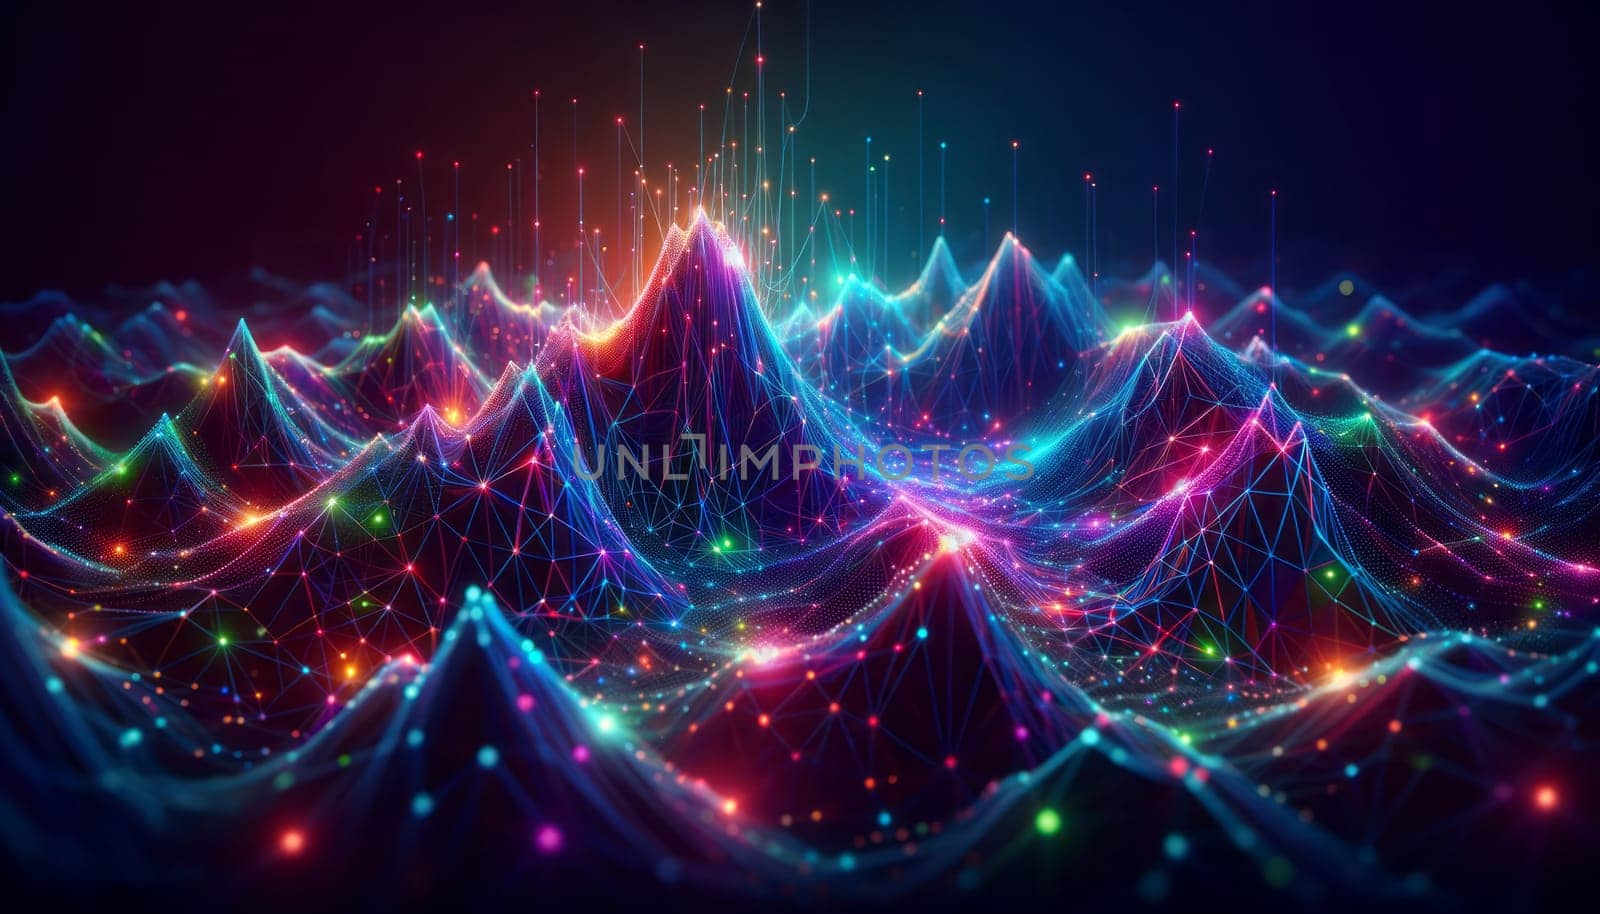 A wide digital illustration of a network of connected points creating a low poly landscape. The image features a rich, dark background with a network composed of vibrant, neon-colored lines and dots, glowing intensely. Colors range from blues and purples to reds and greens, creating a dynamic and colorful energy flow throughout the network. The low poly shapes form peaks and valleys, suggesting a digital mountain range. Light flares and subtle glows add depth and complexity to the scene, giving it a sense of three-dimensional space.